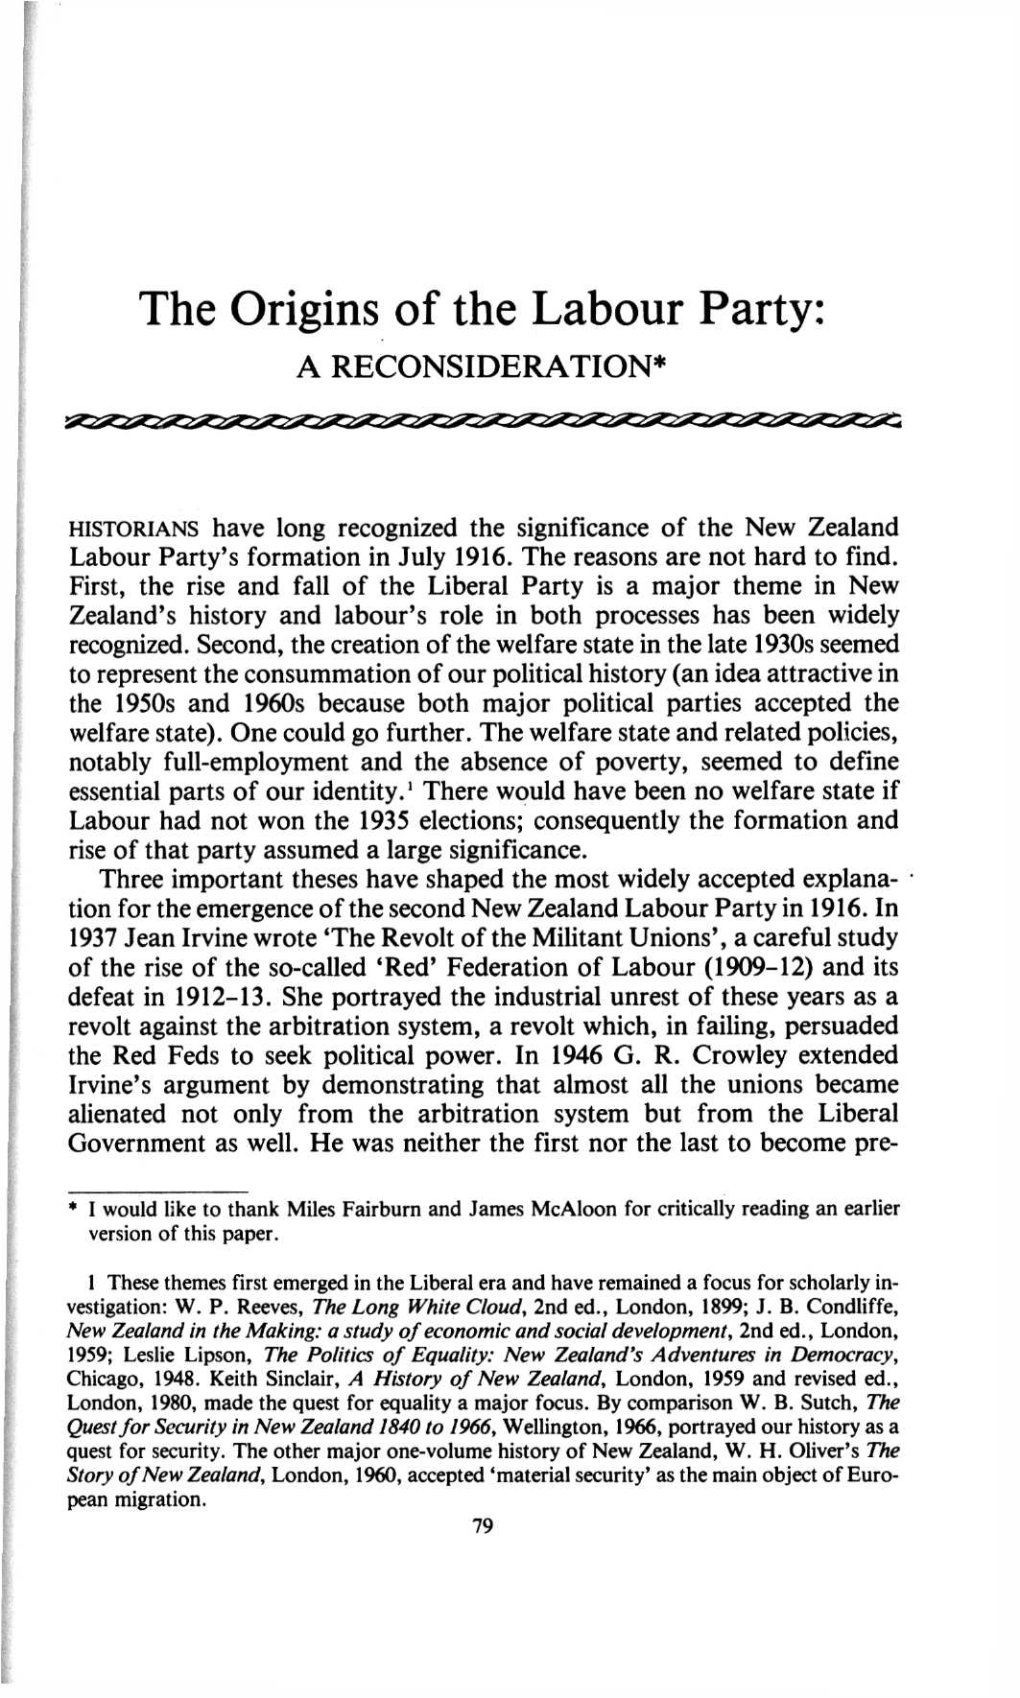 The Origins of the Labour Party: a RECONSIDERATION*